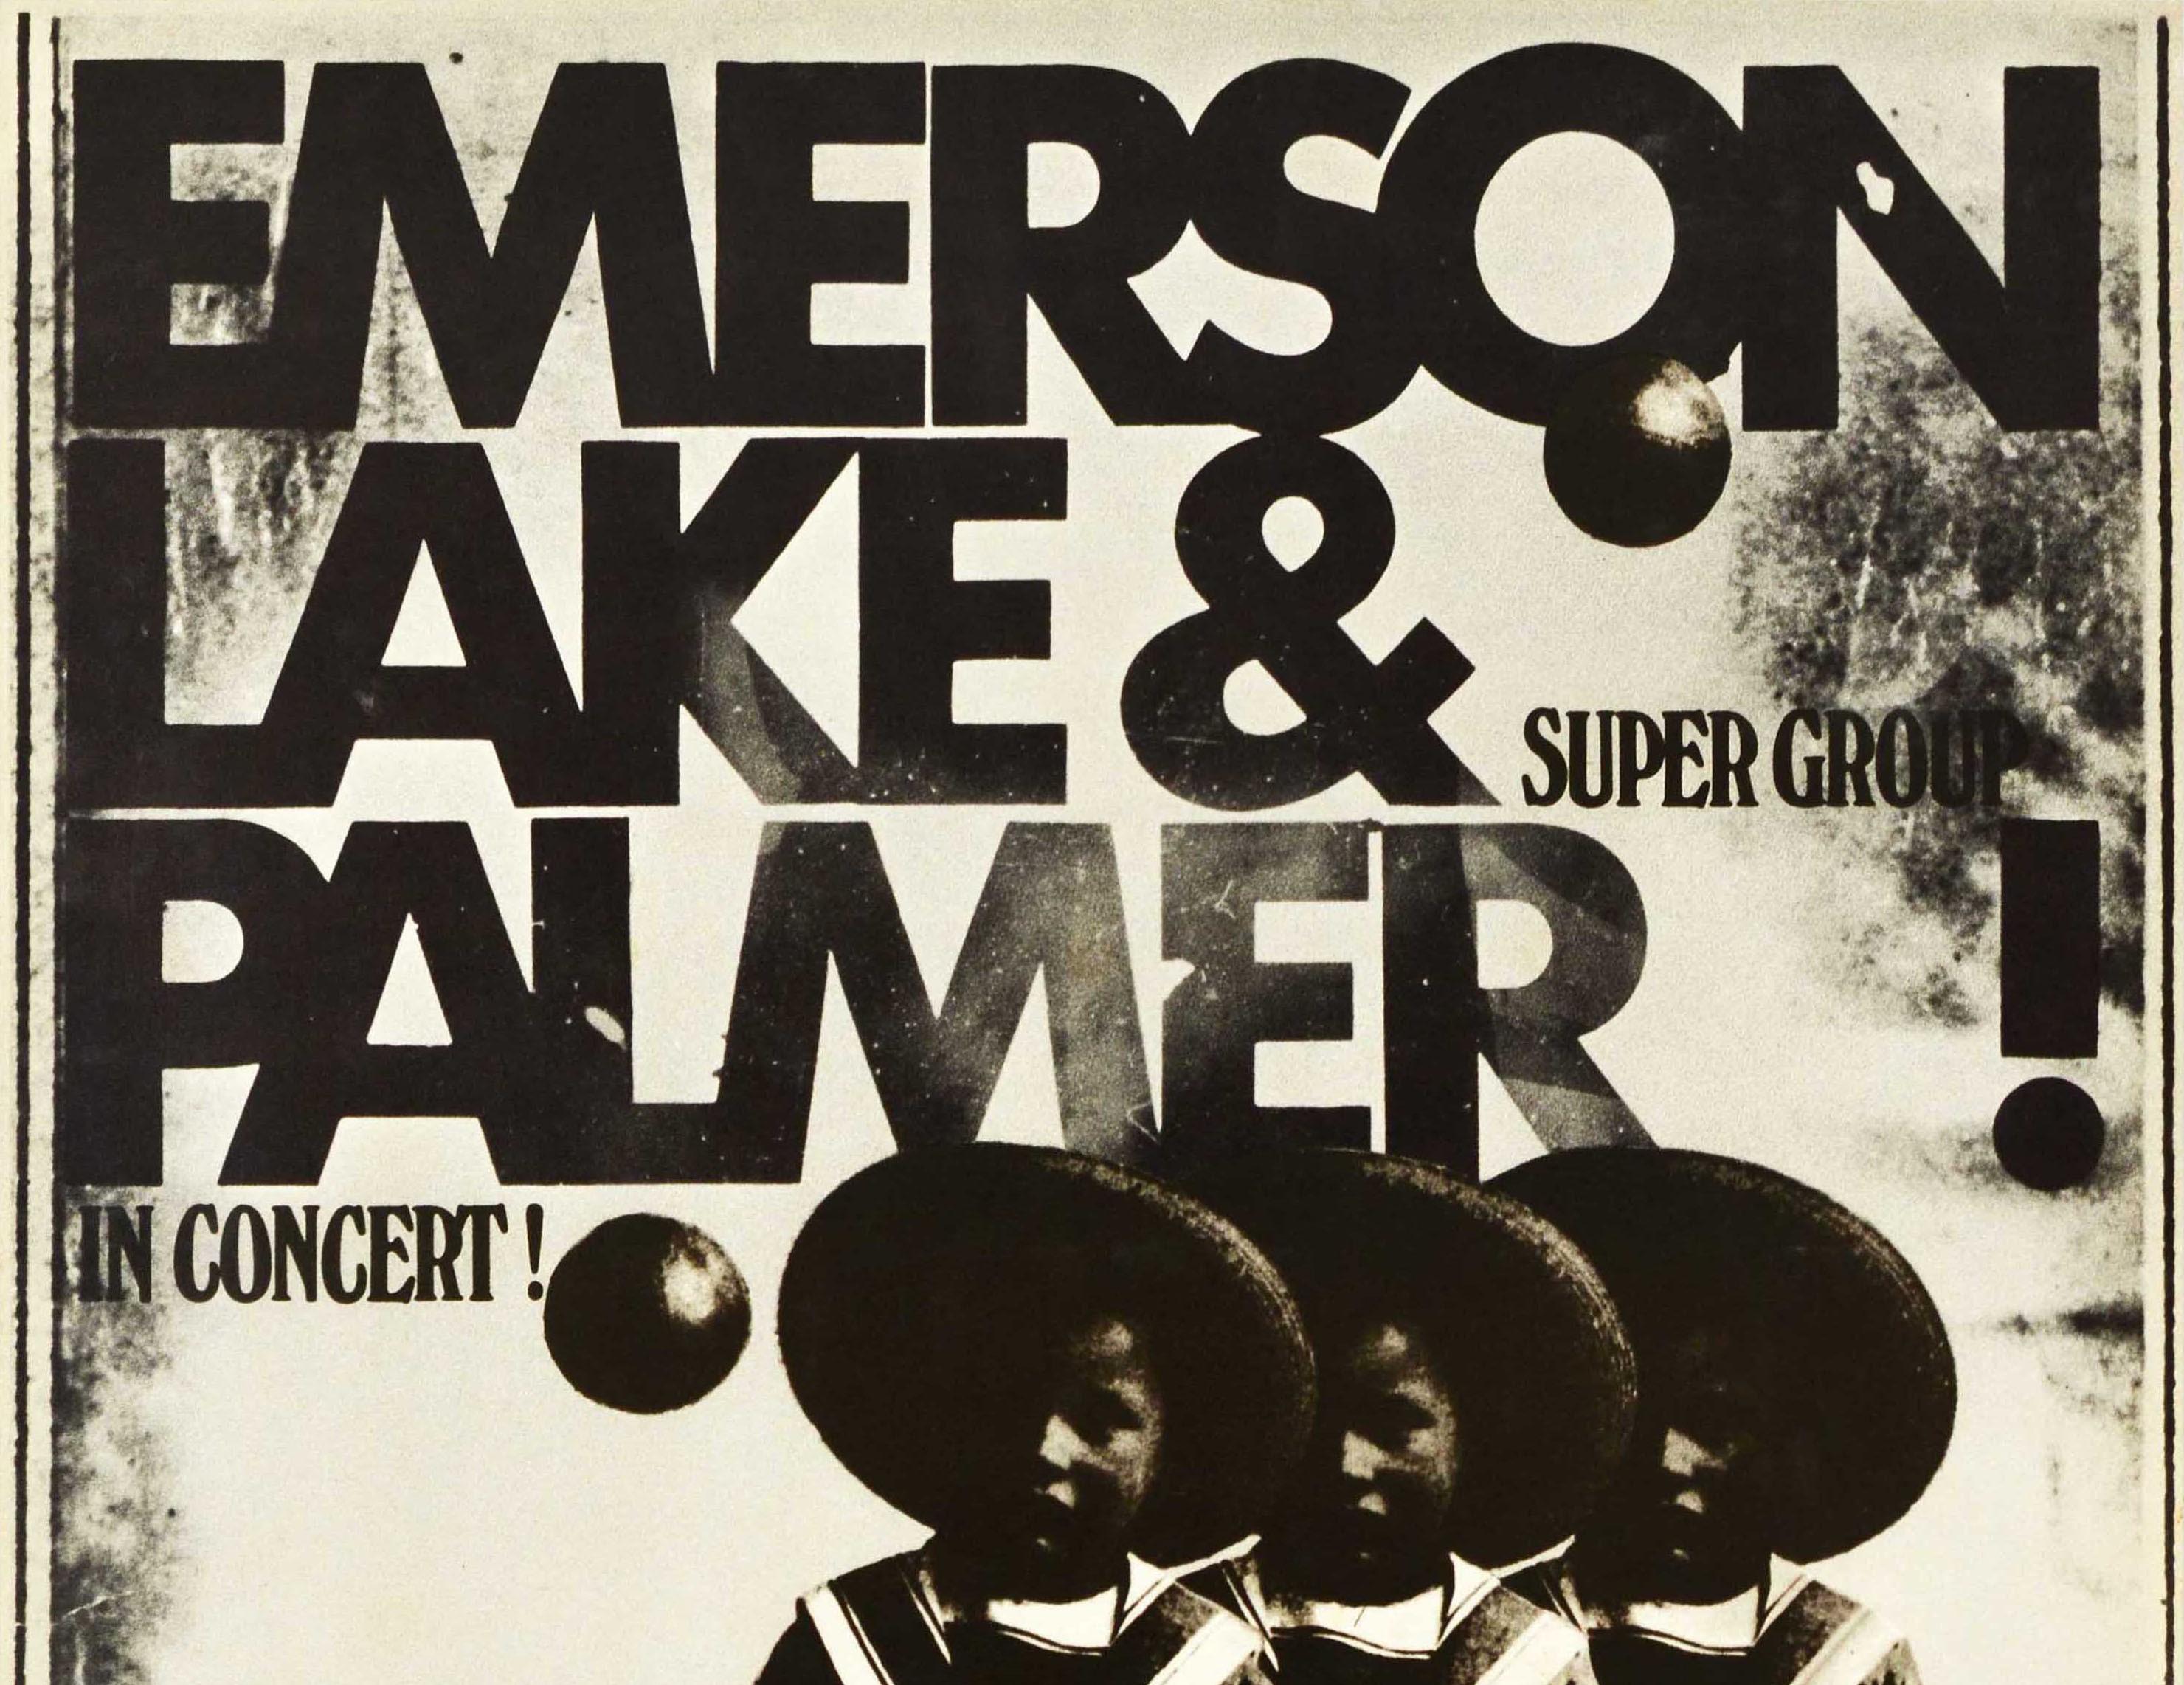 Original vintage music poster for Emerson Lake & Palmer Super Group in Concert Keith Greg & Carl featuring the bold black text above a photograph design showing the three members of the successful English progressive art rock group as children - the